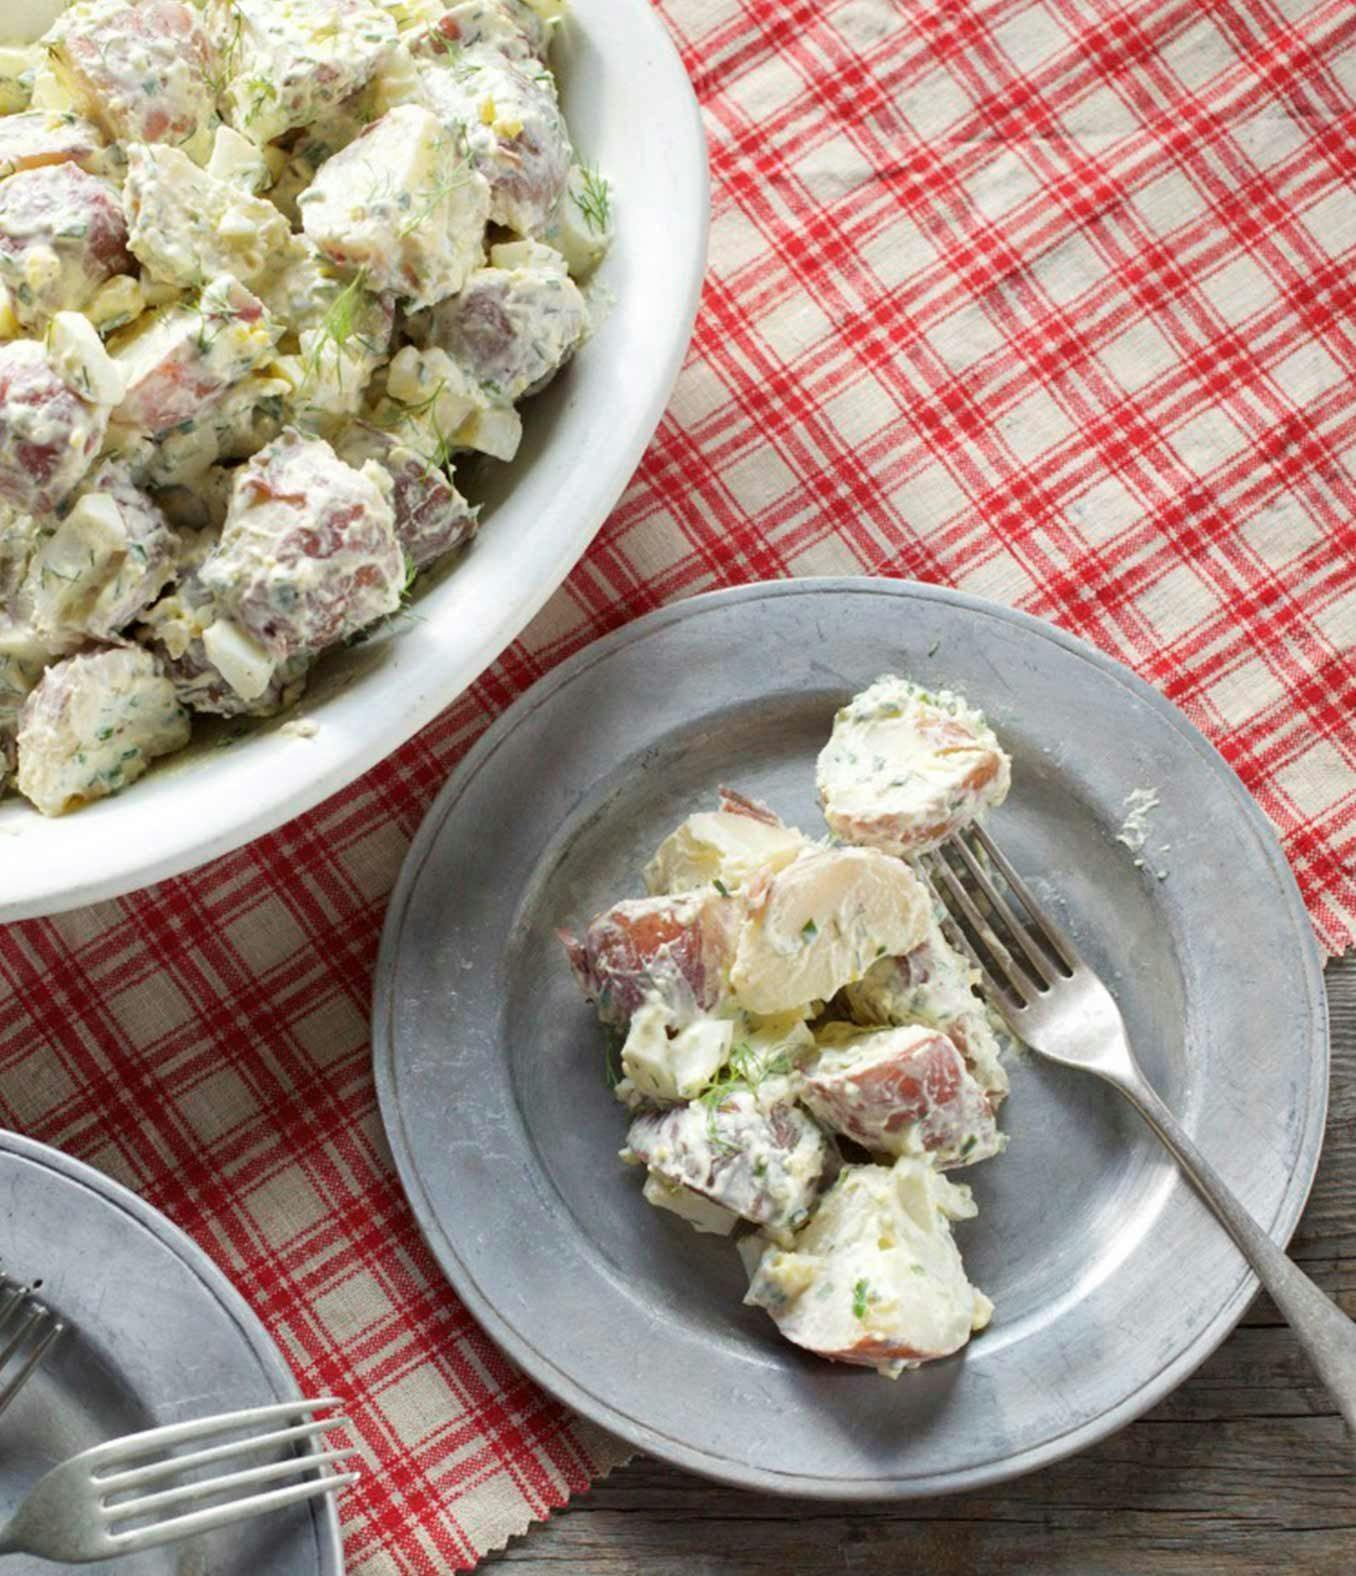 Picnic Potato Salad on a red and white checked picnic blanket.